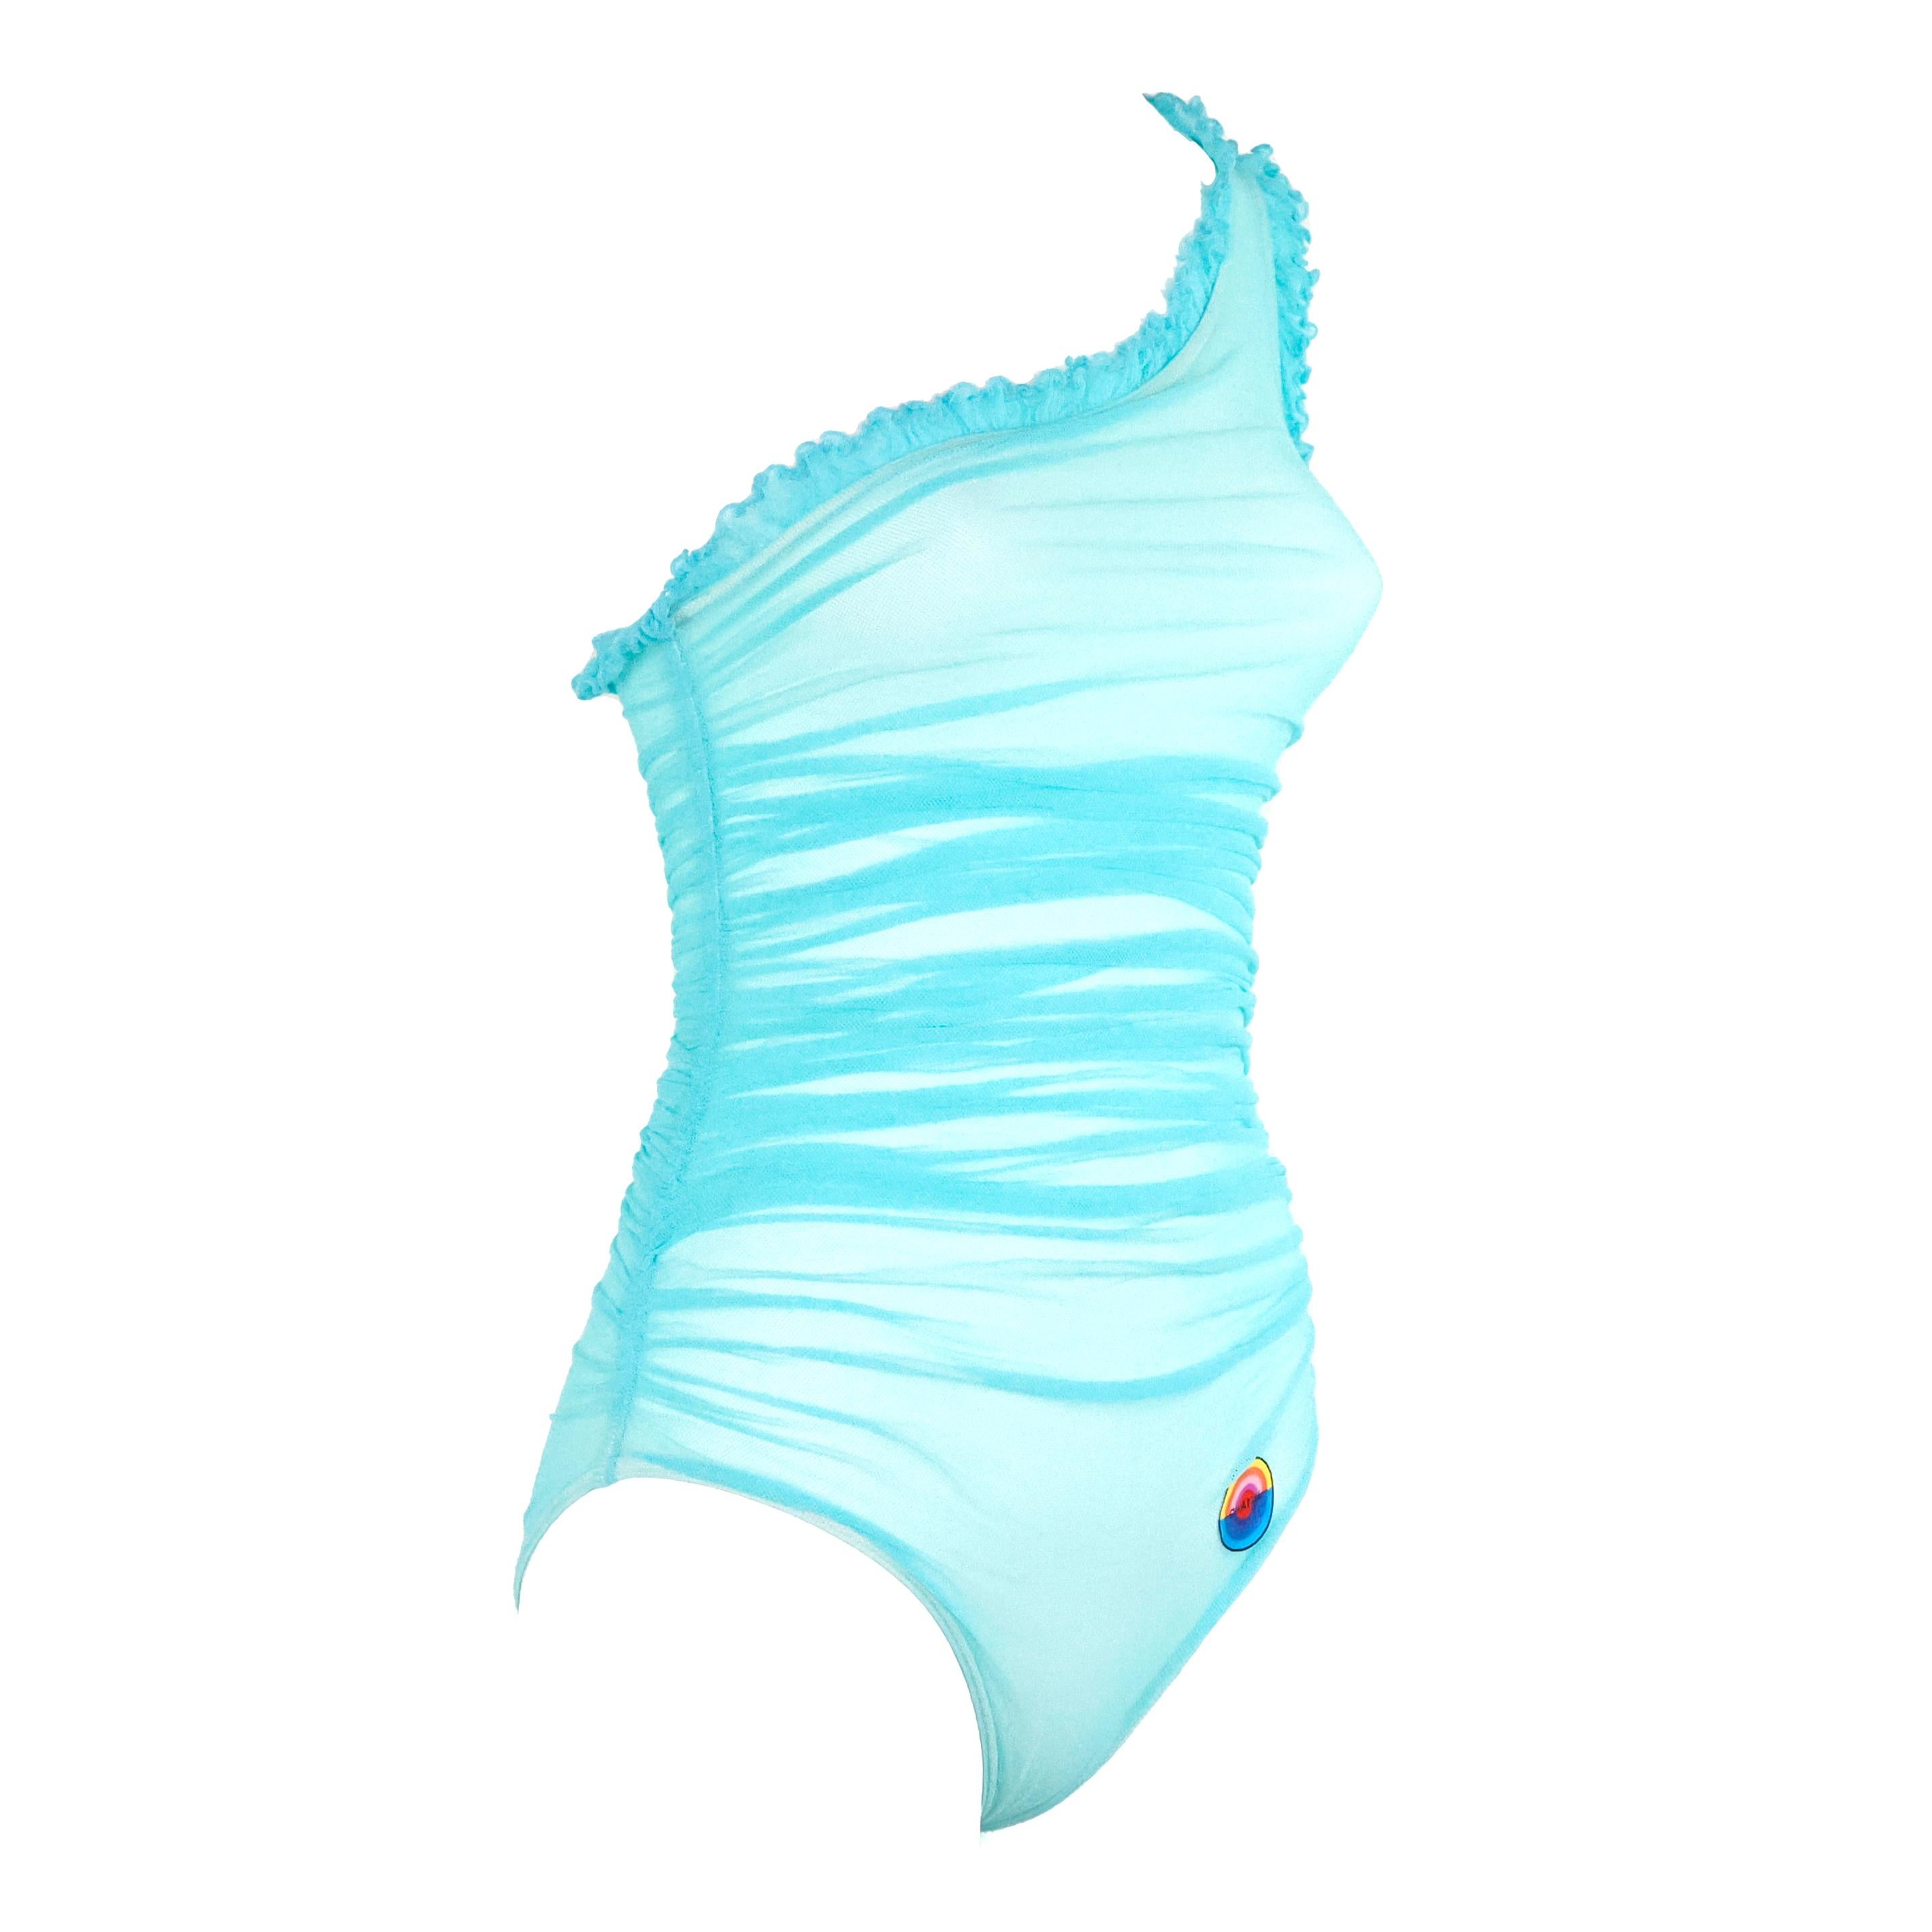 Chanel Ruffle Swimsuit In Excellent Condition For Sale In Bressanone, IT